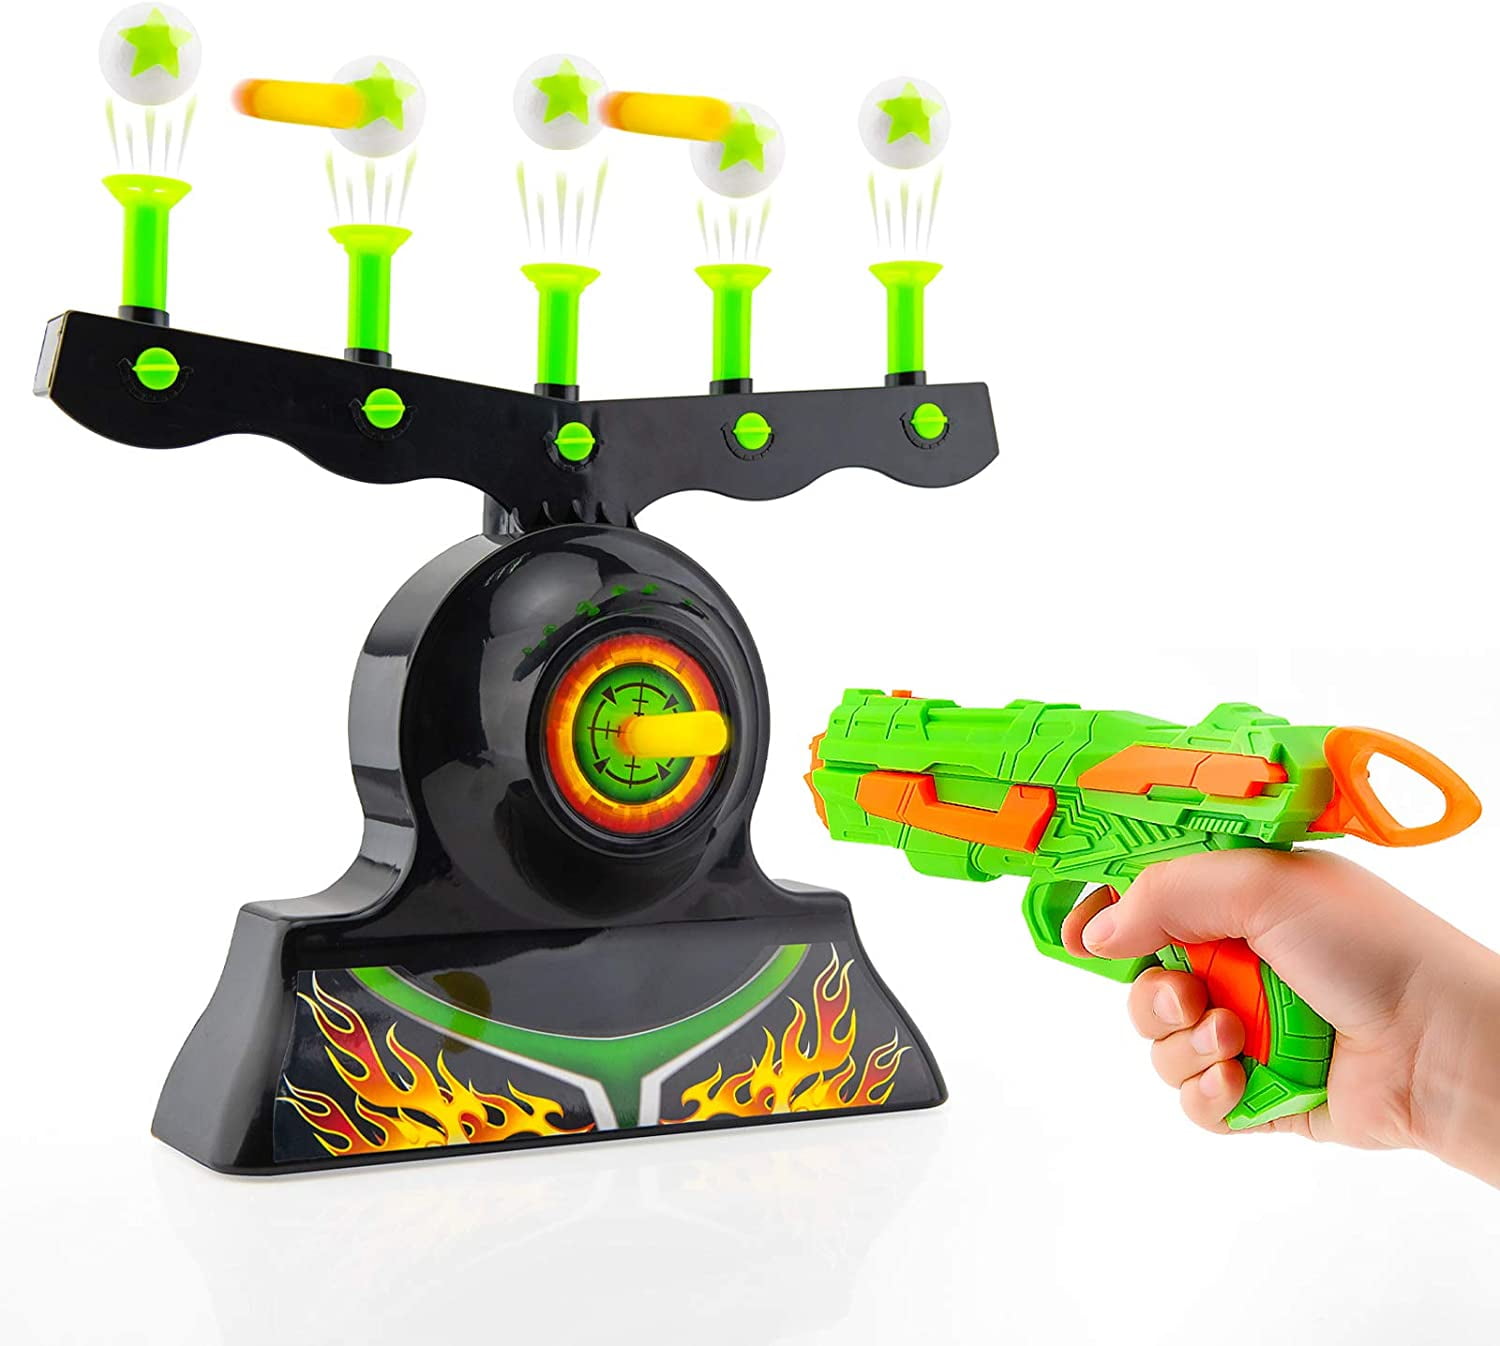 Shooting Games Toy for Age 6, 7, 8, 9, 10+ Years Old Kids, Boys - Glow in The Dark Foam Blaster Toy with 10 Floating Ball Targets and 3 Foam Dart - Ideal Gift